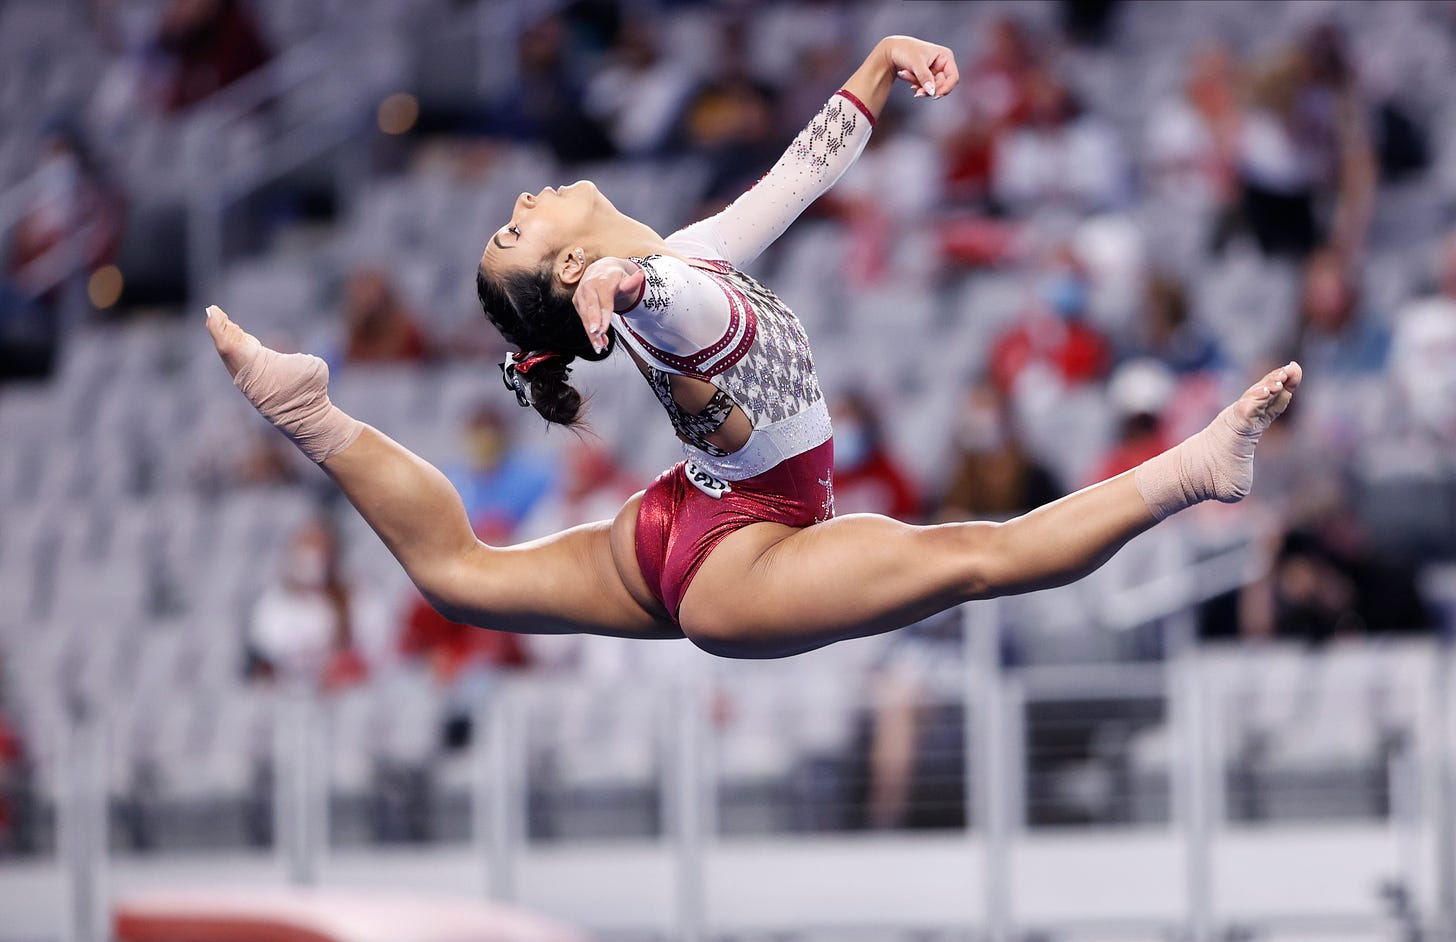 Alabama gymnastics wins 2 national titles, but not coveted team trophy